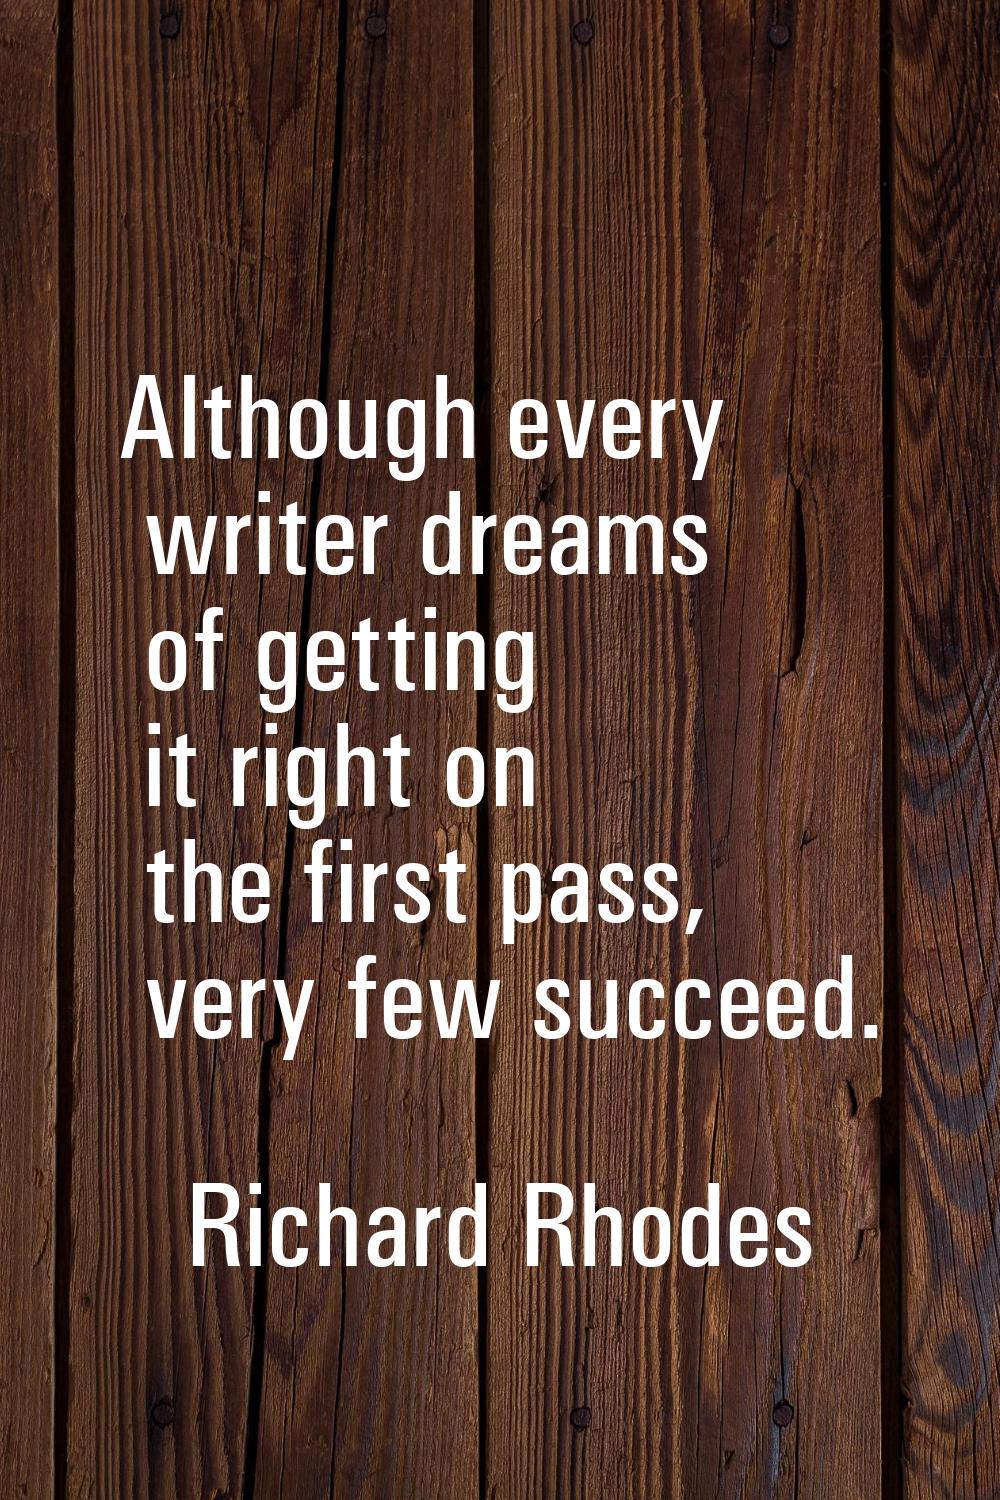 Although every writer dreams of getting it right on the first pass, very few succeed.